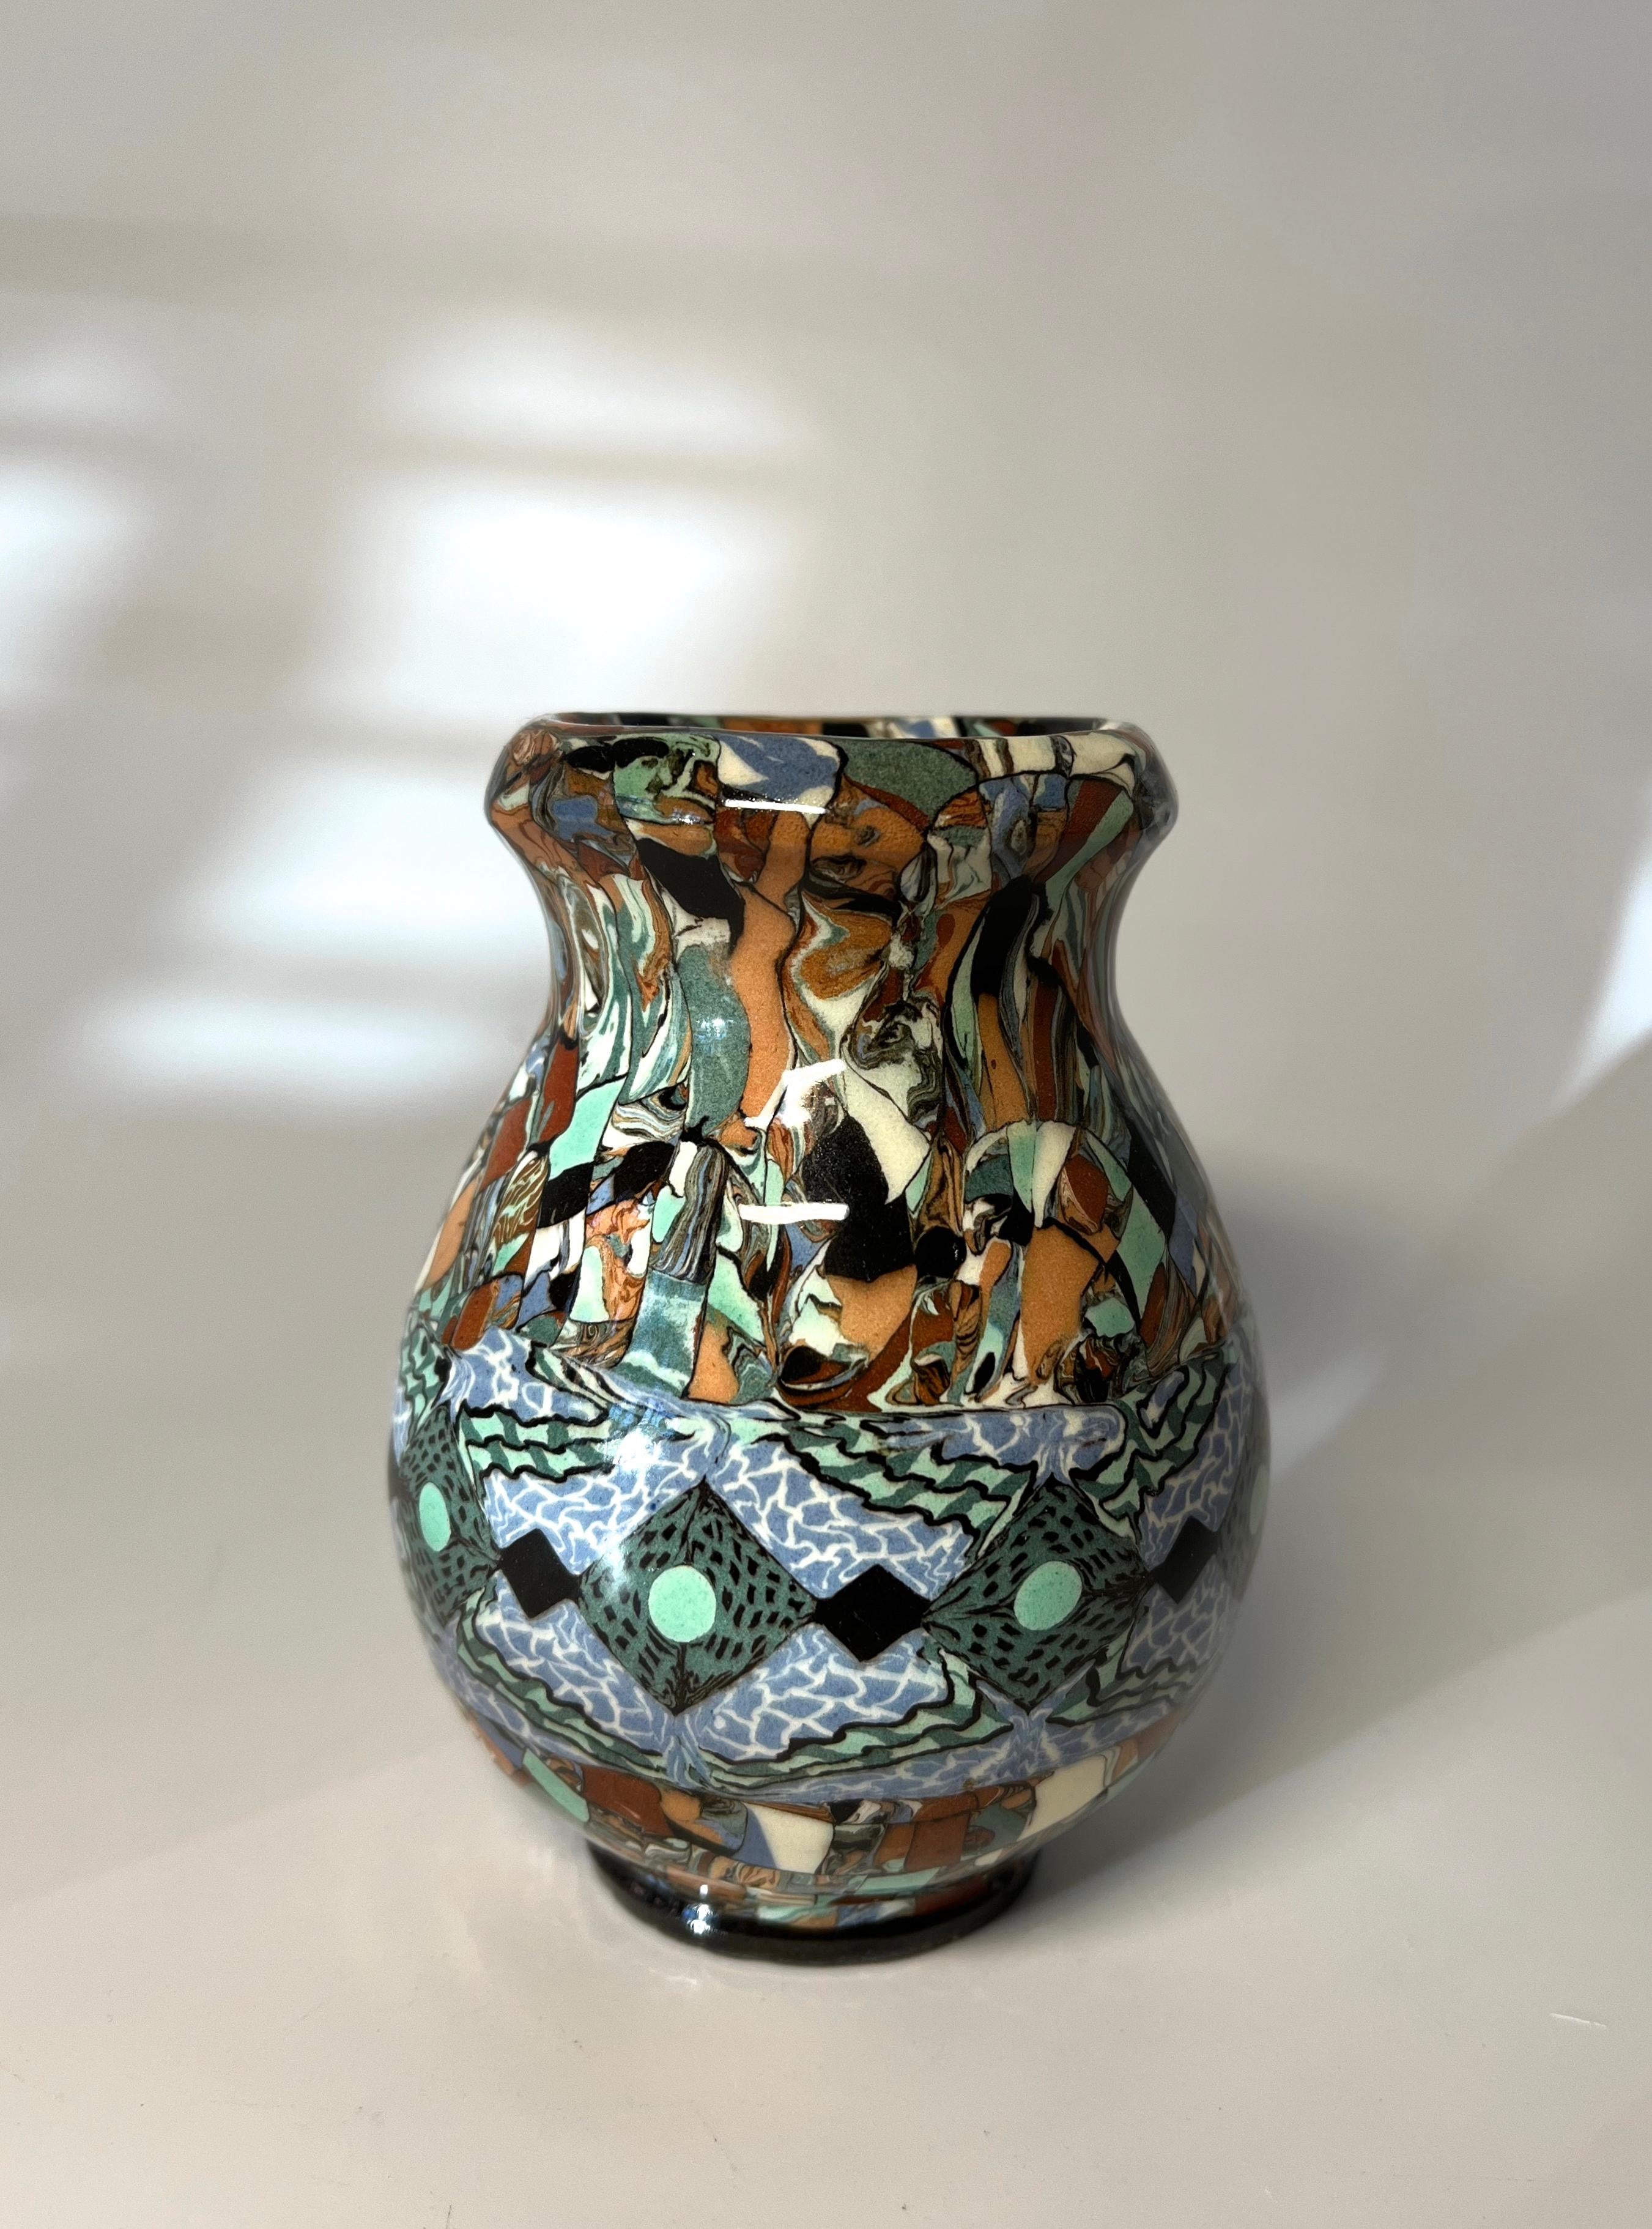 Jean Gerbino for Vallauris, France, ceramic glazed mosaic, shaped vase with dark green and black diamond chain motif
In exceptional original condition
Circa 1960's
Signed Gerbino  to base
Height 4.5 inch, Diameter 3.5 inch, 
In excellent condition.